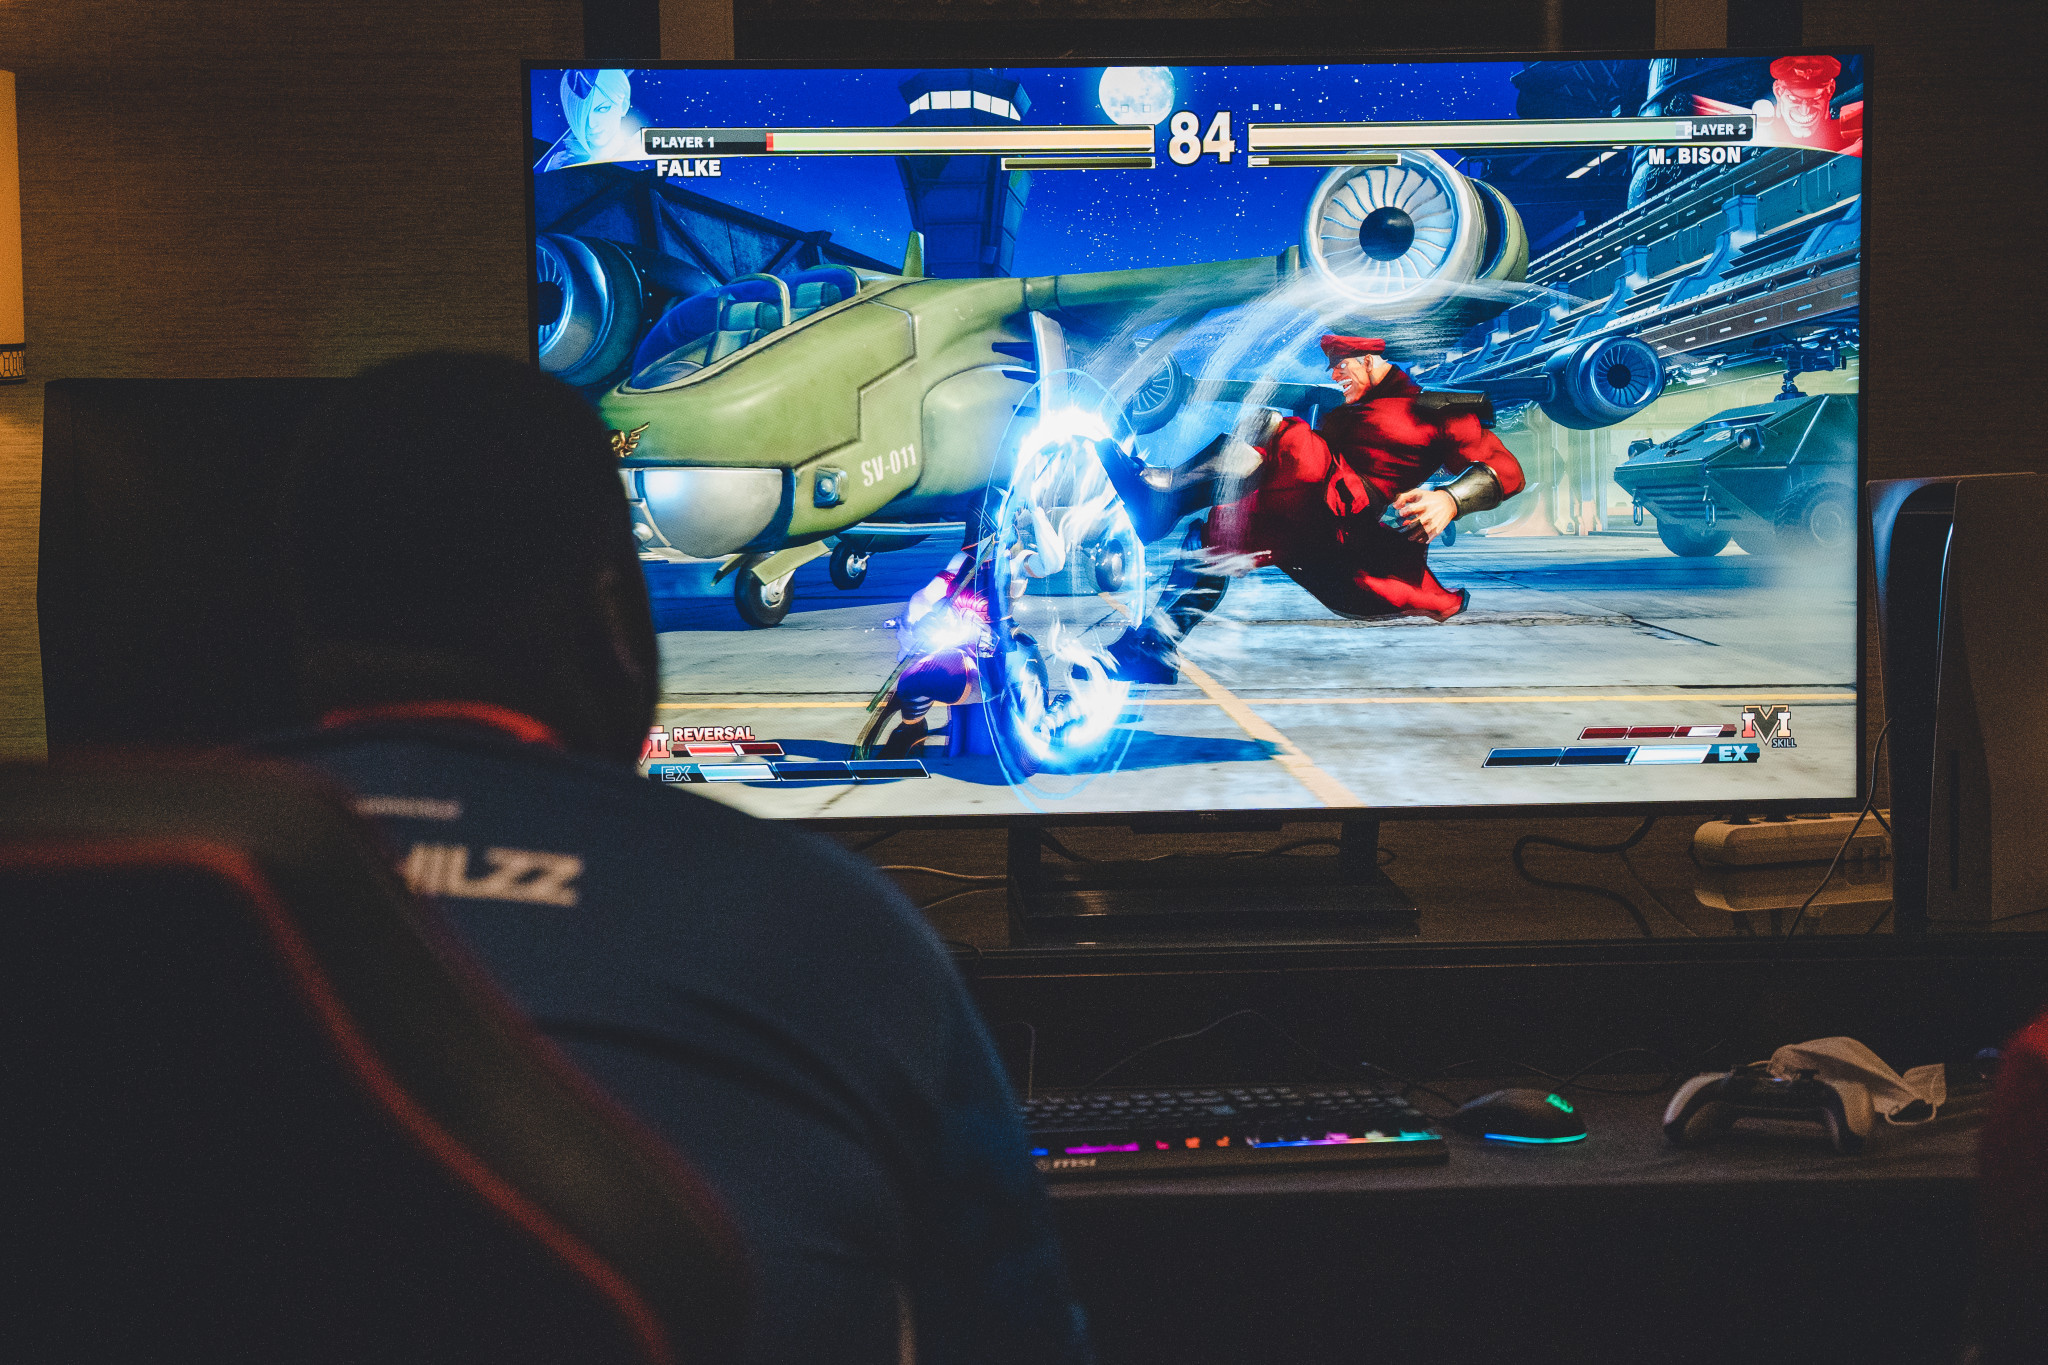 GEFcon took place before the beginning of the Global Esports Games finals, while practice sessions were held prior to competition ©British Esports